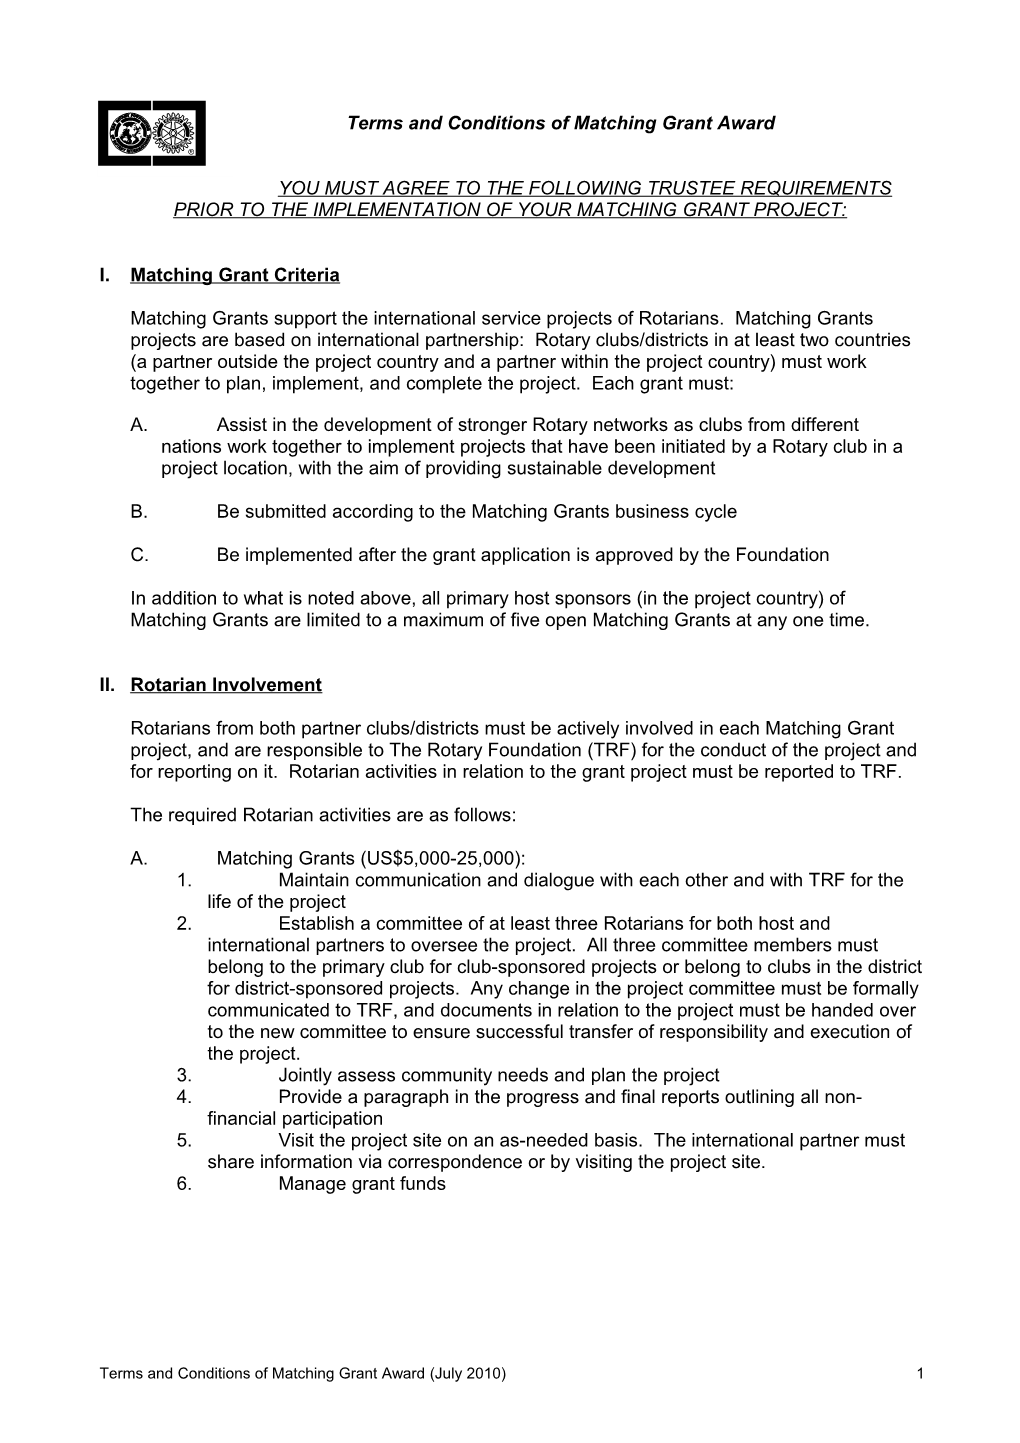 Matching Grant Terms and Conditions - EN